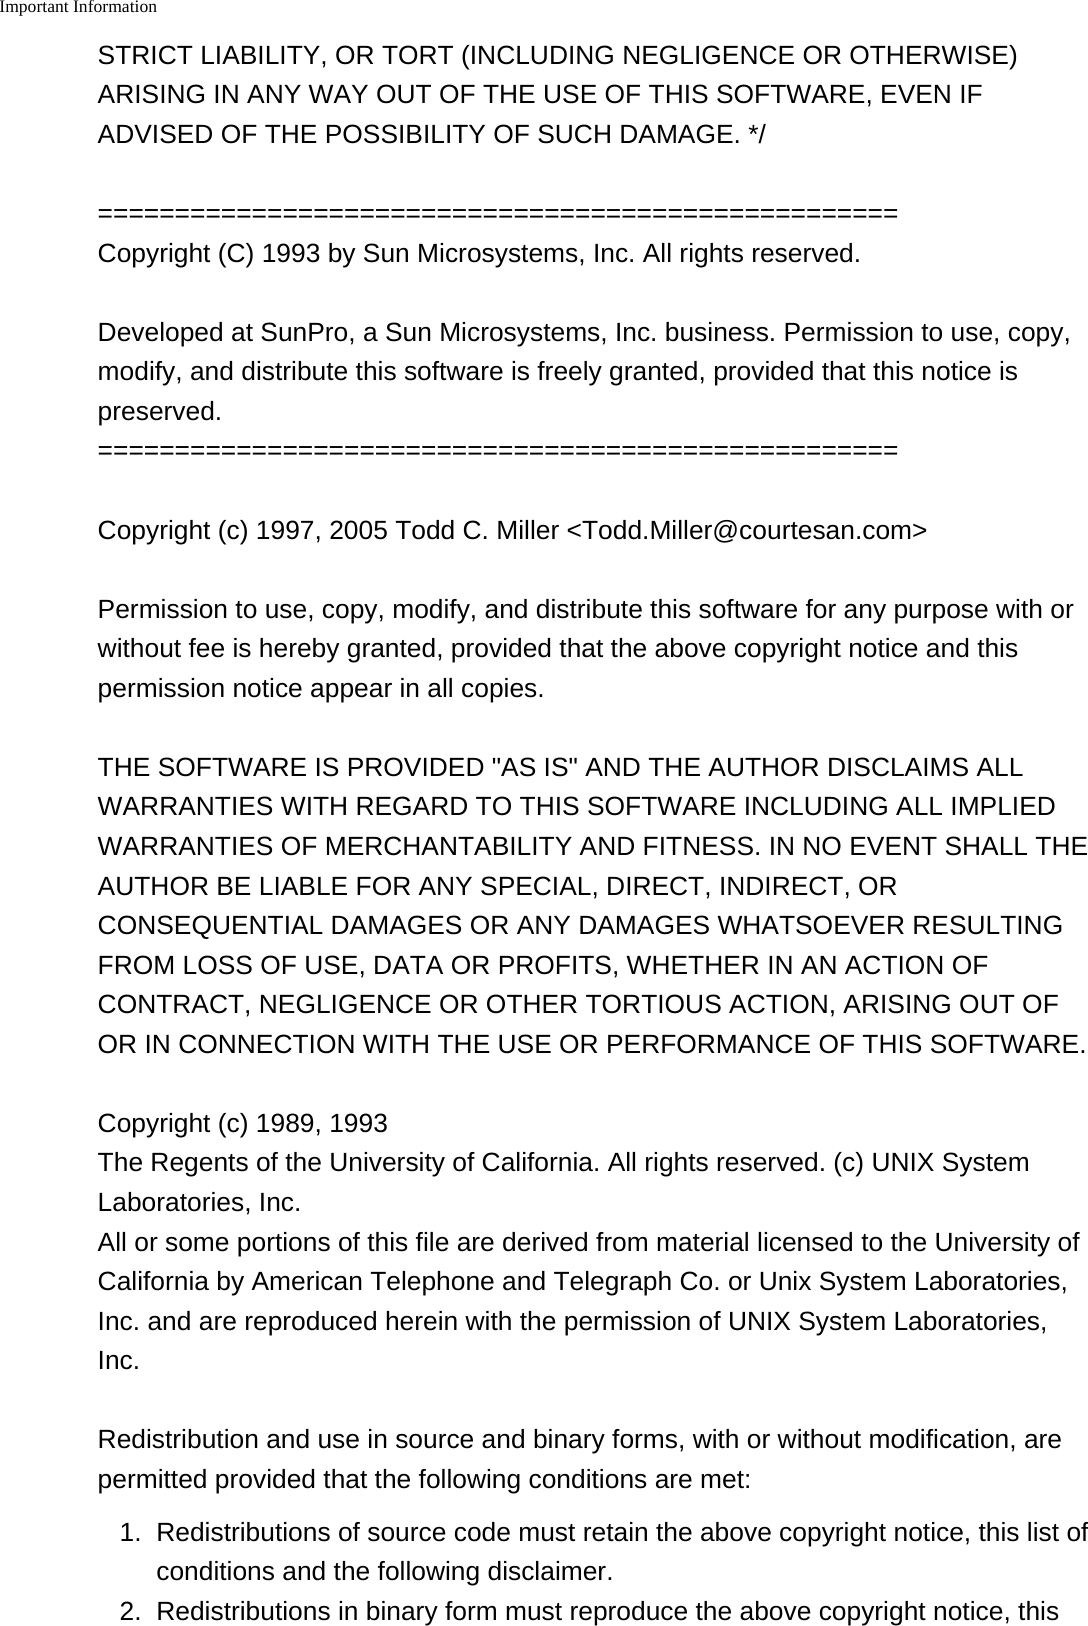 Important Information    STRICT LIABILITY, OR TORT (INCLUDING NEGLIGENCE OR OTHERWISE)ARISING IN ANY WAY OUT OF THE USE OF THIS SOFTWARE, EVEN IFADVISED OF THE POSSIBILITY OF SUCH DAMAGE. */====================================================Copyright (C) 1993 by Sun Microsystems, Inc. All rights reserved.Developed at SunPro, a Sun Microsystems, Inc. business. Permission to use, copy,modify, and distribute this software is freely granted, provided that this notice ispreserved.====================================================Copyright (c) 1997, 2005 Todd C. Miller &lt;Todd.Miller@courtesan.com&gt;Permission to use, copy, modify, and distribute this software for any purpose with orwithout fee is hereby granted, provided that the above copyright notice and thispermission notice appear in all copies.THE SOFTWARE IS PROVIDED &quot;AS IS&quot; AND THE AUTHOR DISCLAIMS ALLWARRANTIES WITH REGARD TO THIS SOFTWARE INCLUDING ALL IMPLIEDWARRANTIES OF MERCHANTABILITY AND FITNESS. IN NO EVENT SHALL THEAUTHOR BE LIABLE FOR ANY SPECIAL, DIRECT, INDIRECT, ORCONSEQUENTIAL DAMAGES OR ANY DAMAGES WHATSOEVER RESULTINGFROM LOSS OF USE, DATA OR PROFITS, WHETHER IN AN ACTION OFCONTRACT, NEGLIGENCE OR OTHER TORTIOUS ACTION, ARISING OUT OFOR IN CONNECTION WITH THE USE OR PERFORMANCE OF THIS SOFTWARE.Copyright (c) 1989, 1993The Regents of the University of California. All rights reserved. (c) UNIX SystemLaboratories, Inc.All or some portions of this file are derived from material licensed to the University ofCalifornia by American Telephone and Telegraph Co. or Unix System Laboratories,Inc. and are reproduced herein with the permission of UNIX System Laboratories,Inc.Redistribution and use in source and binary forms, with or without modification, arepermitted provided that the following conditions are met:1. Redistributions of source code must retain the above copyright notice, this list ofconditions and the following disclaimer.2.Redistributions in binary form must reproduce the above copyright notice, this